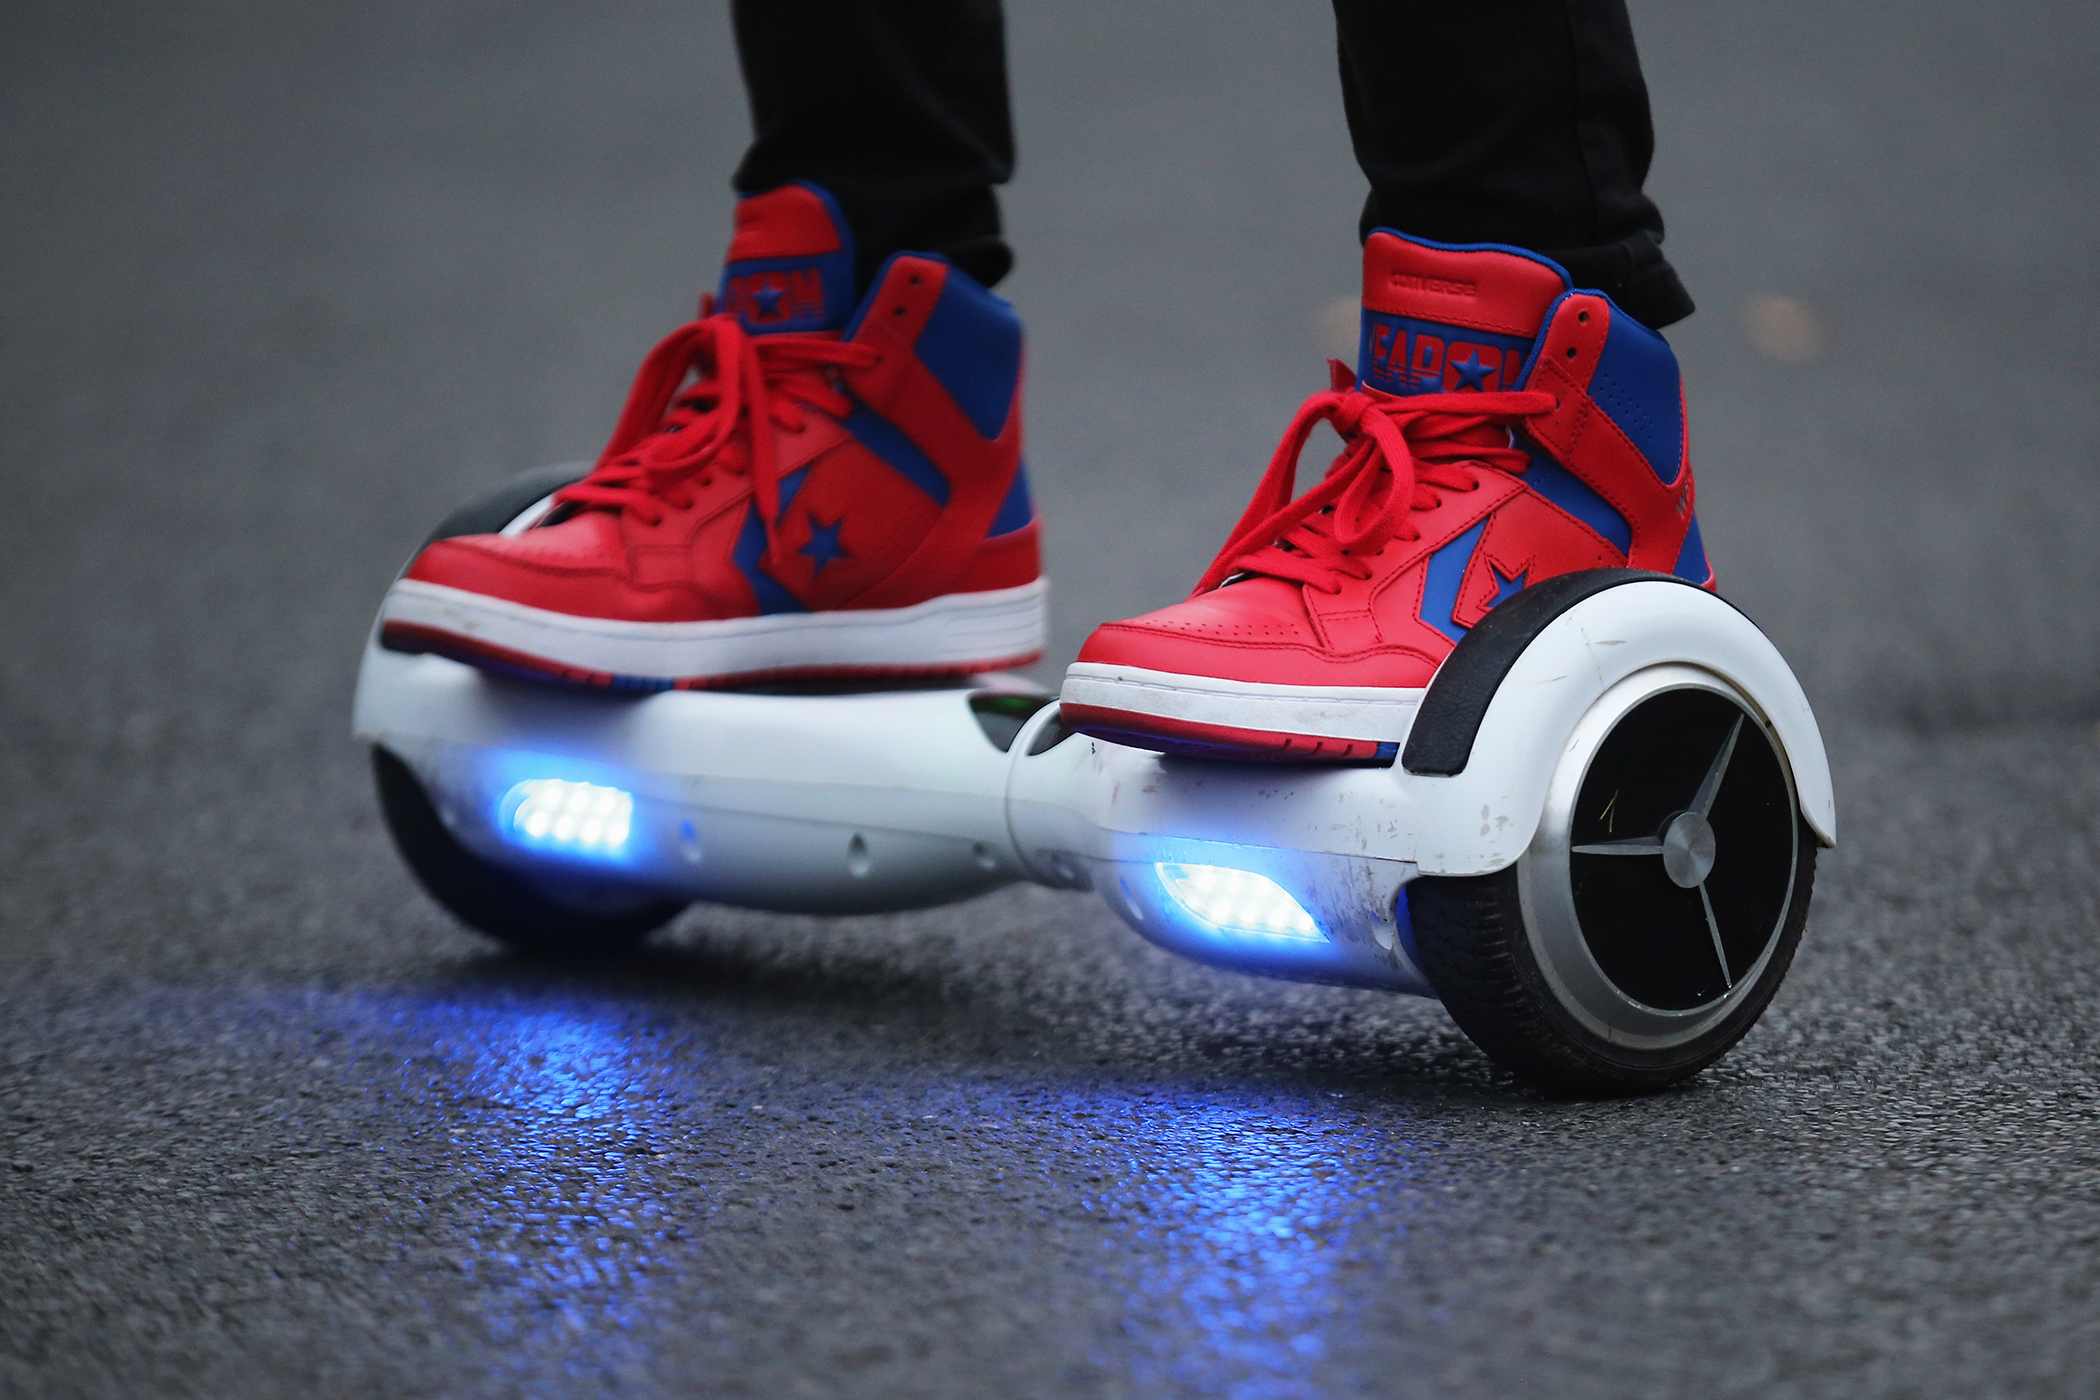 Why I Refuse to Buy My Son a Hoverboard